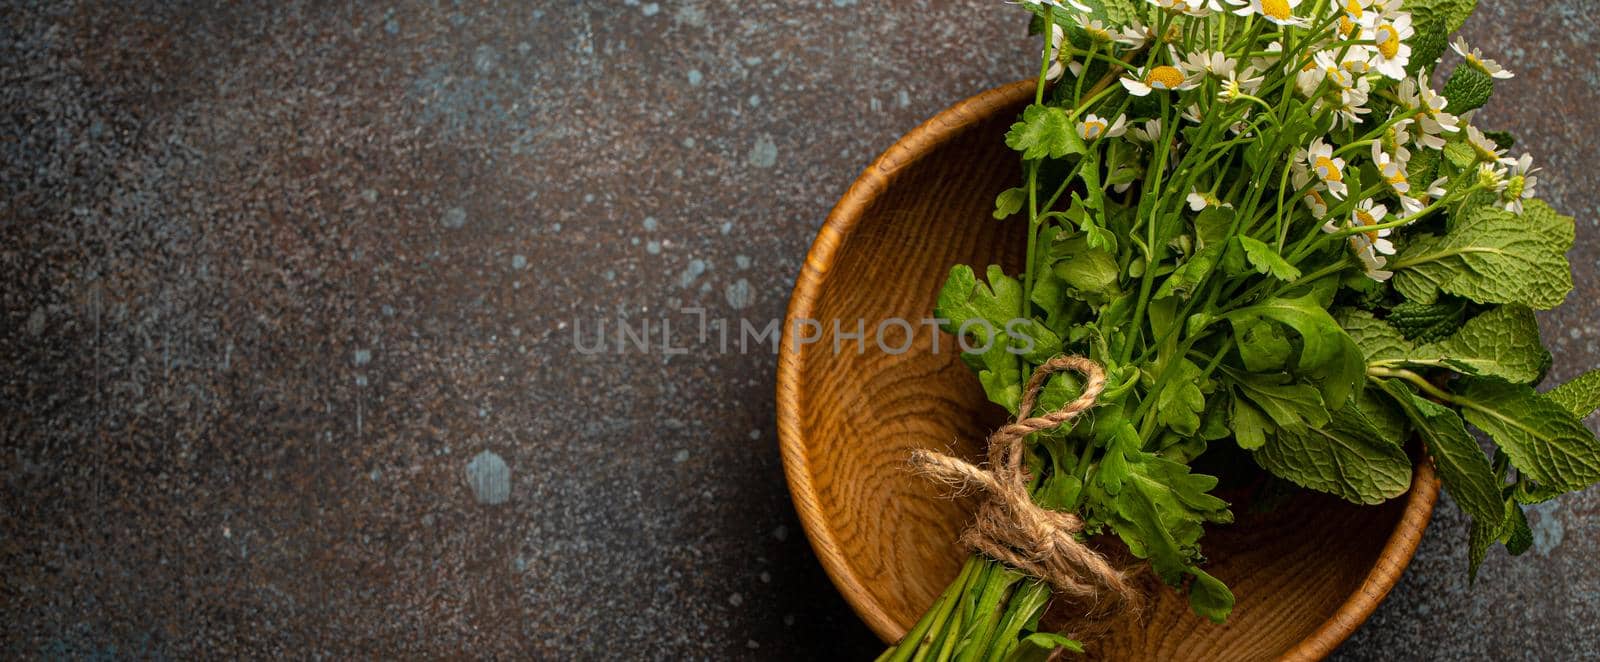 Bunch bouquet of fresh wild flowers and healing herbs in rustic wooden bowl top view flat lay on stone background for herbal alternative medicine and homeopathy, natural herbs medicine concept